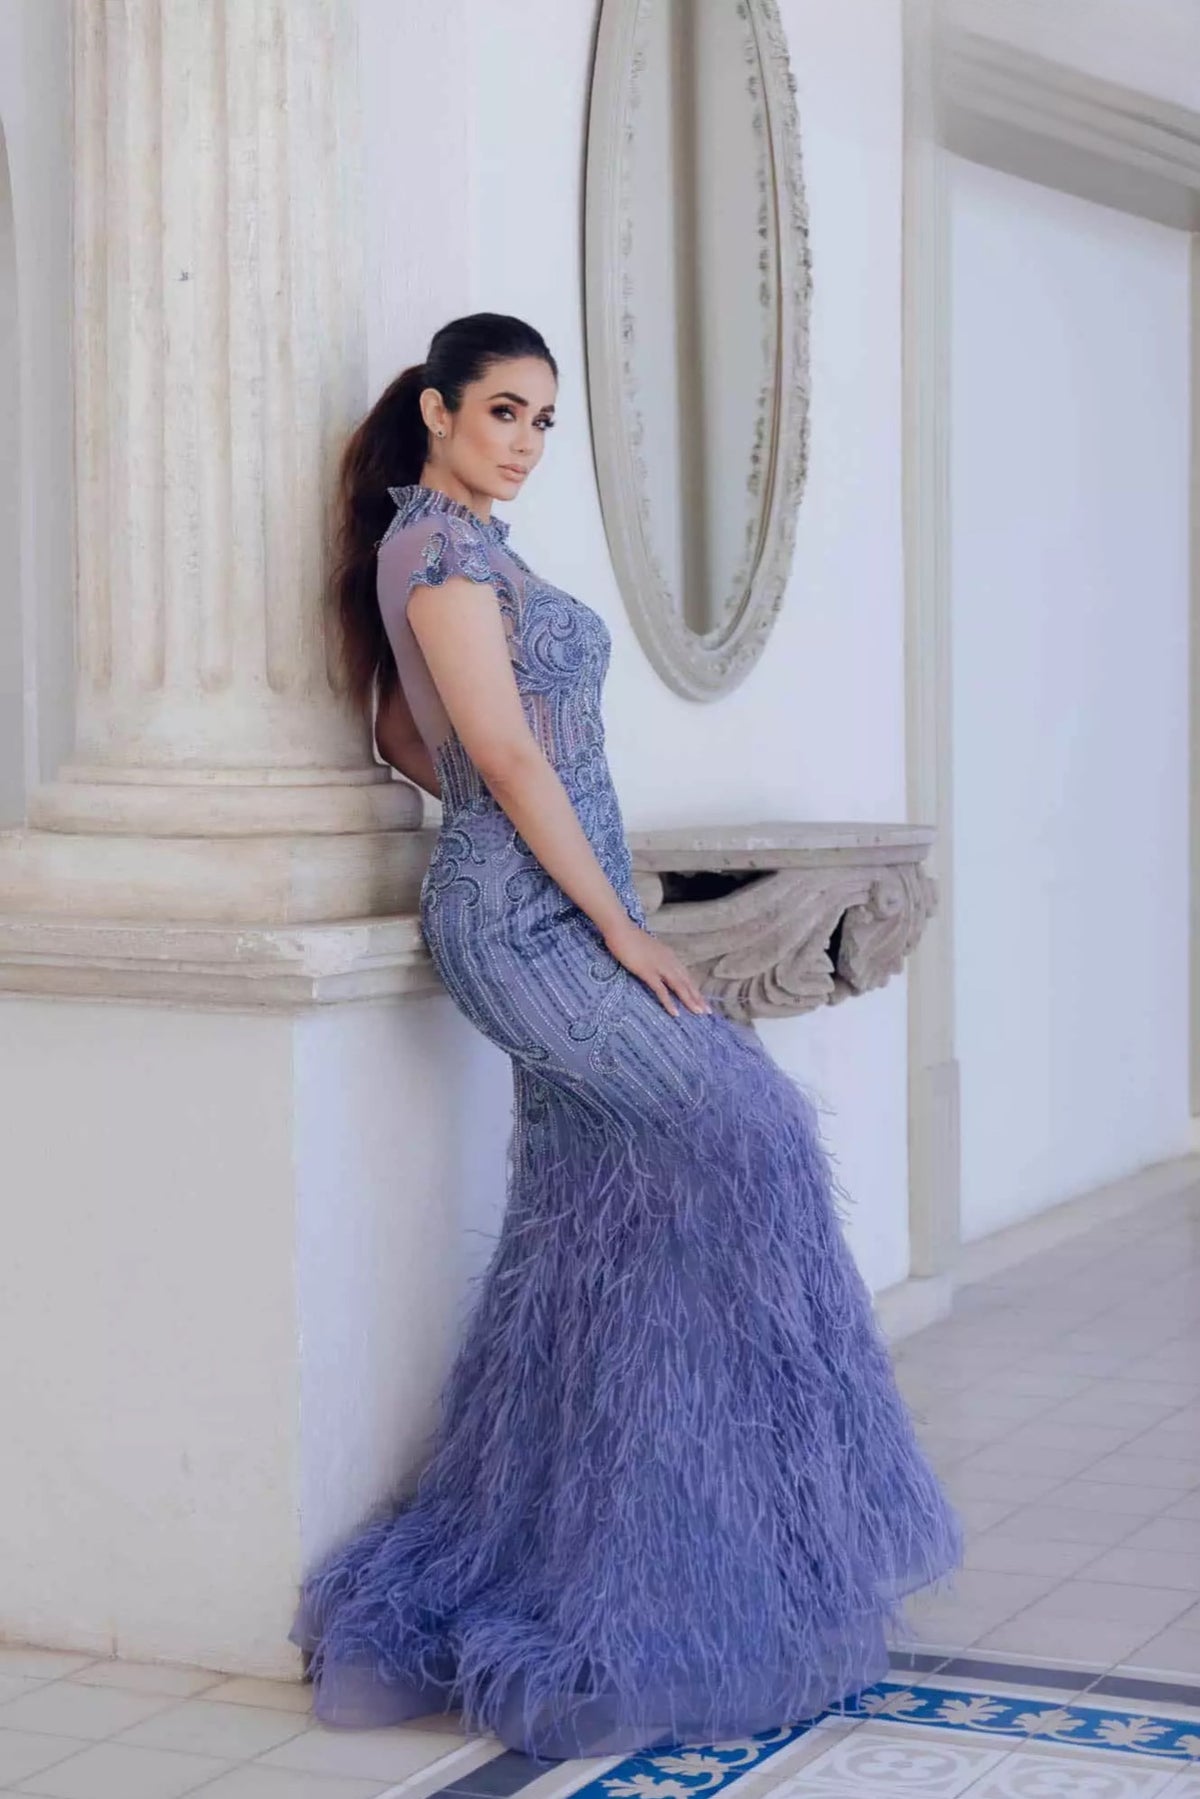 Turn heads in Terani Couture's feathered mermaid dress, featuring a high neck and intricate bead embellishments. Perfect for special evening events. Available at Madeline's Boutique in Toronto and Boca Raton, Florida.